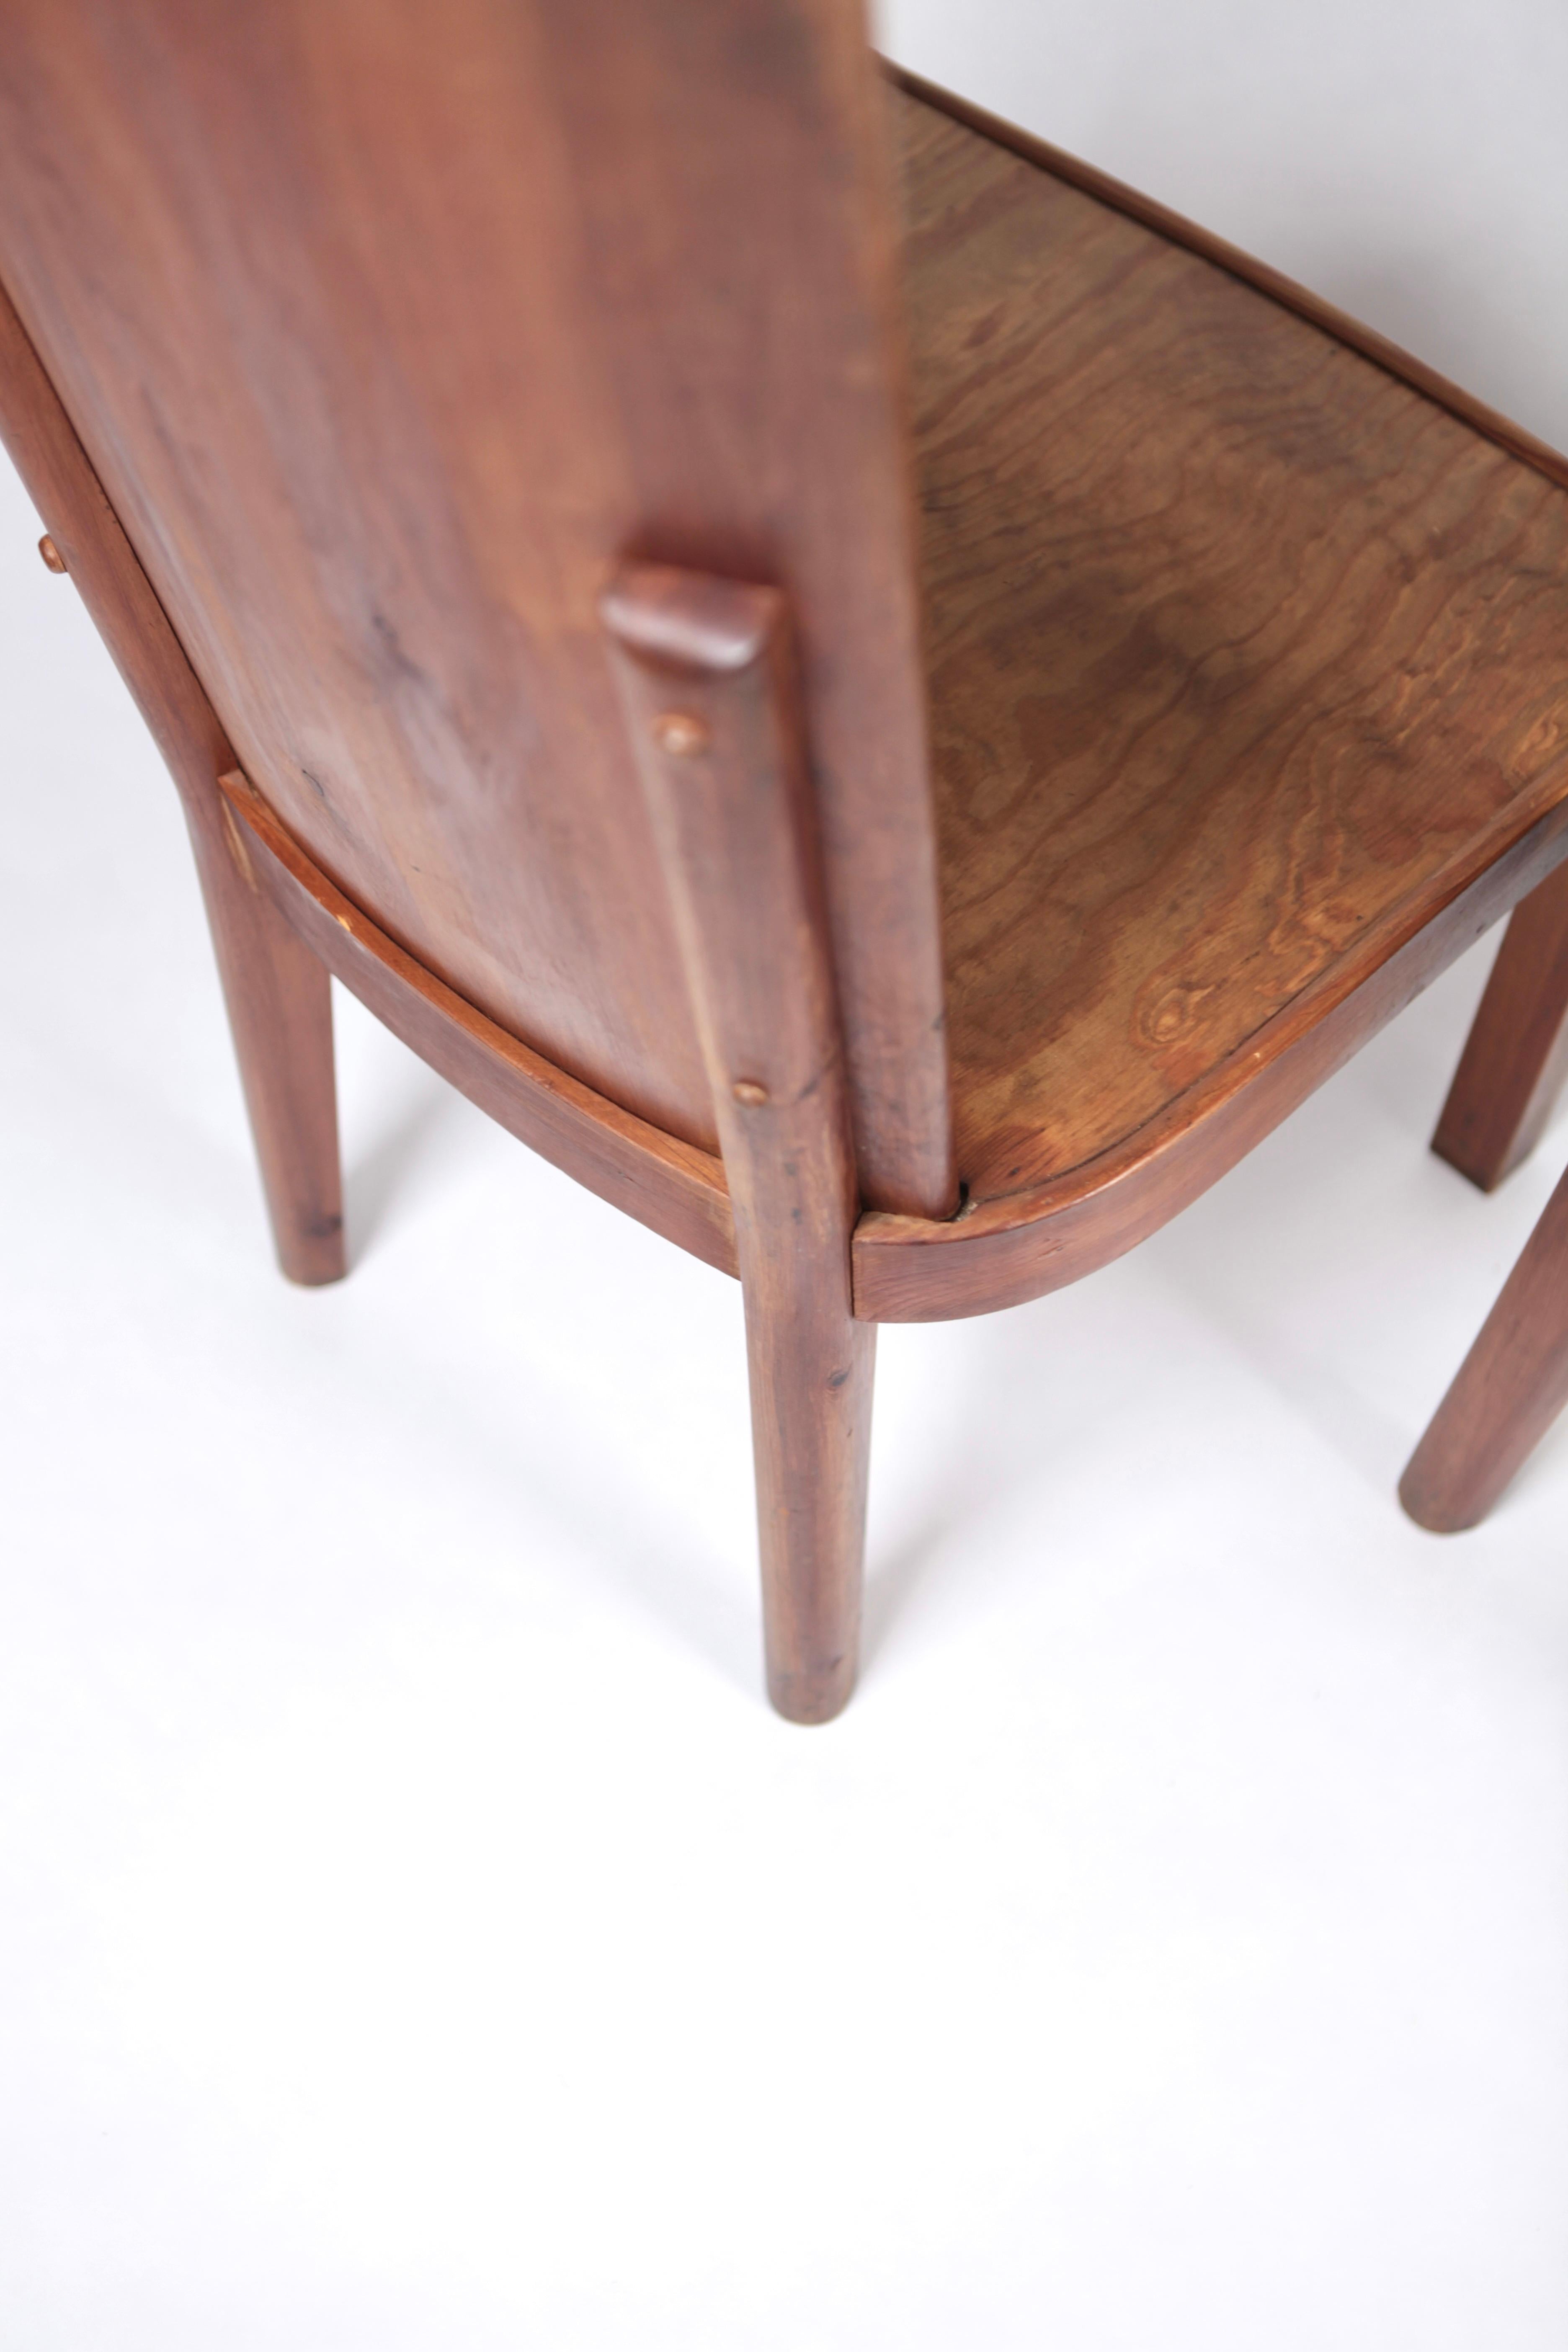 Set of 4 High Back Stained Pine Chairs, Attributed to Axel Einar Hjorth, Sweden  For Sale 5